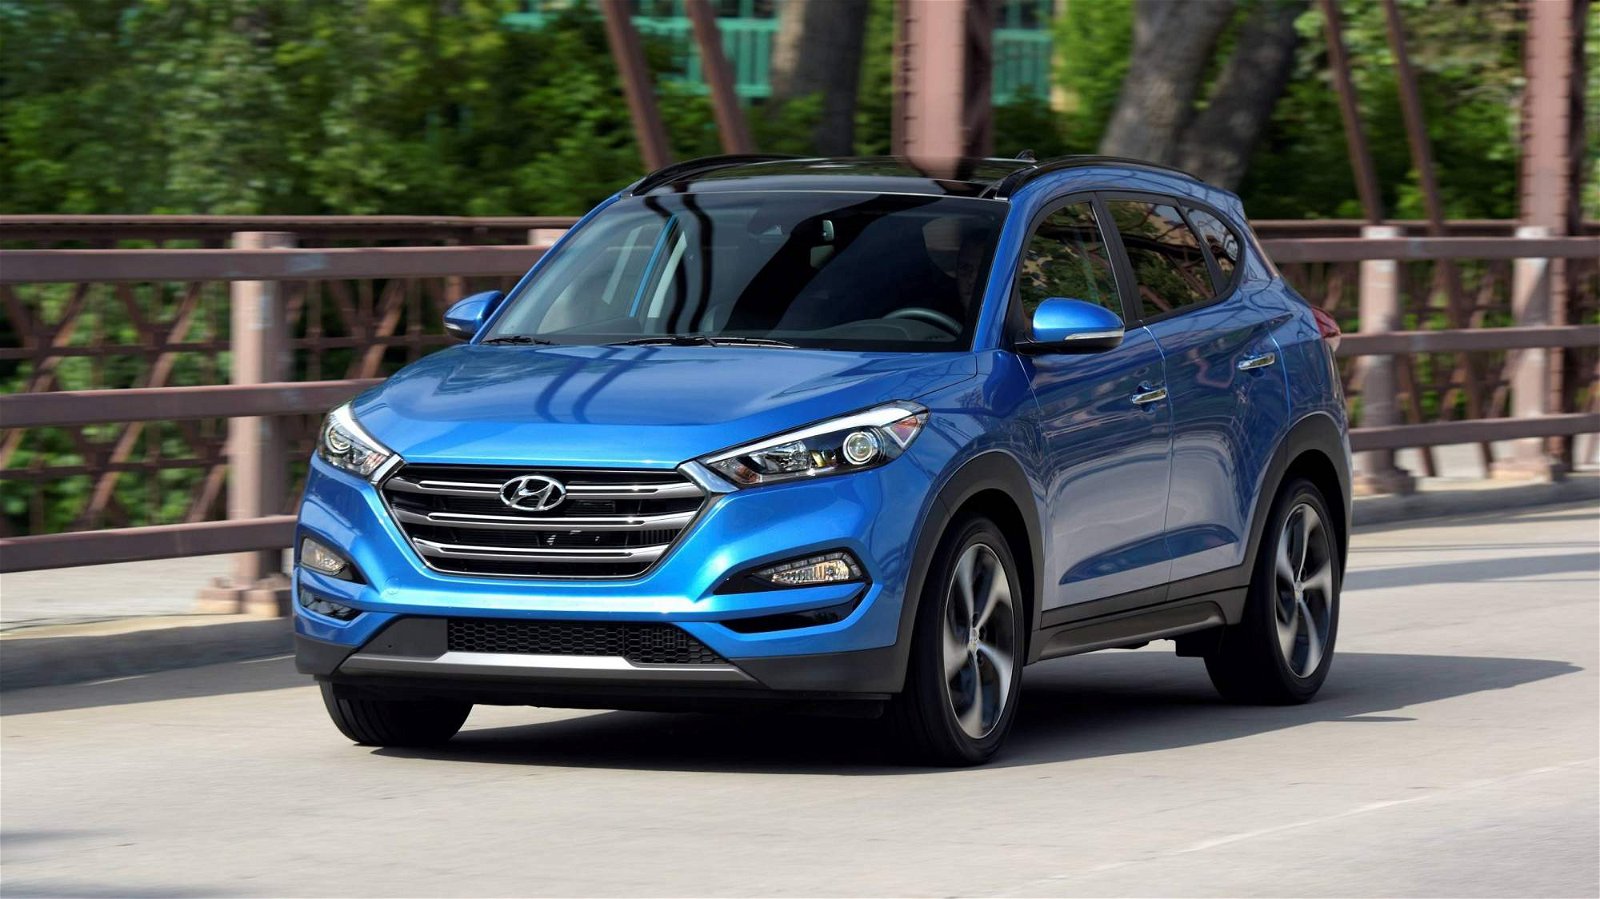 2018 Hyundai Tucson arrives with 181-hp $25,150 sticker price | DriveMag Cars